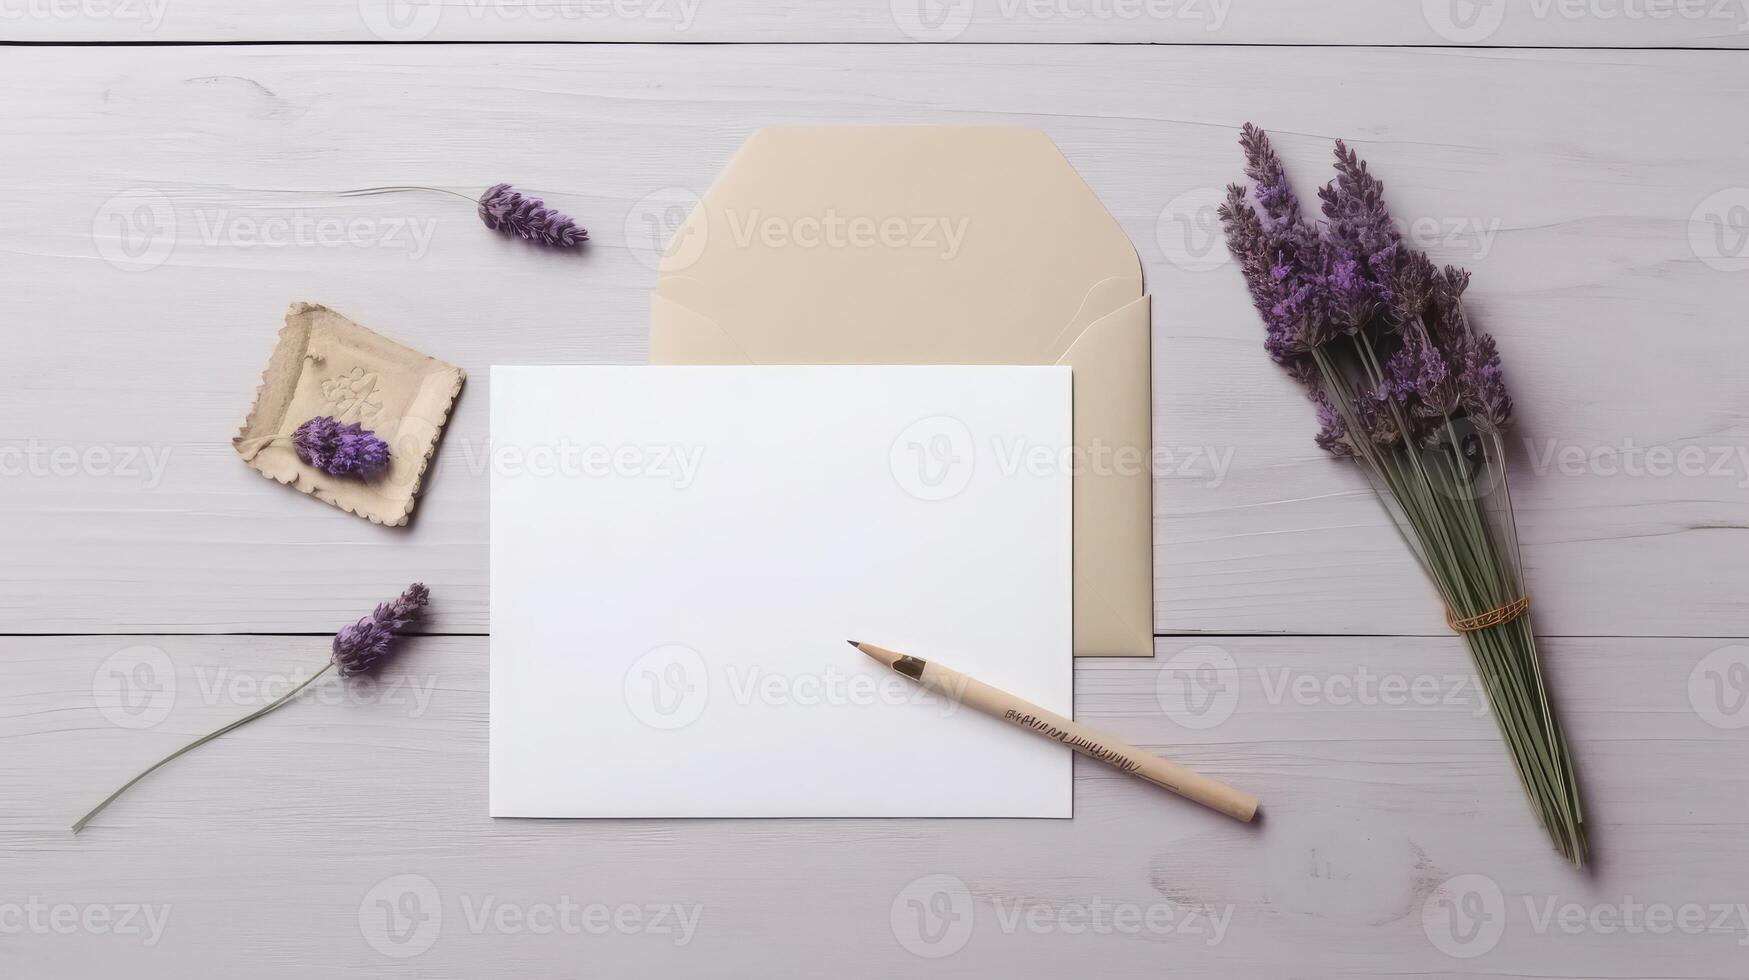 Blank Wedding Card Envelope Mockup, Pencil and Lavender Bouquet on Wooden Texture Table Top. . photo